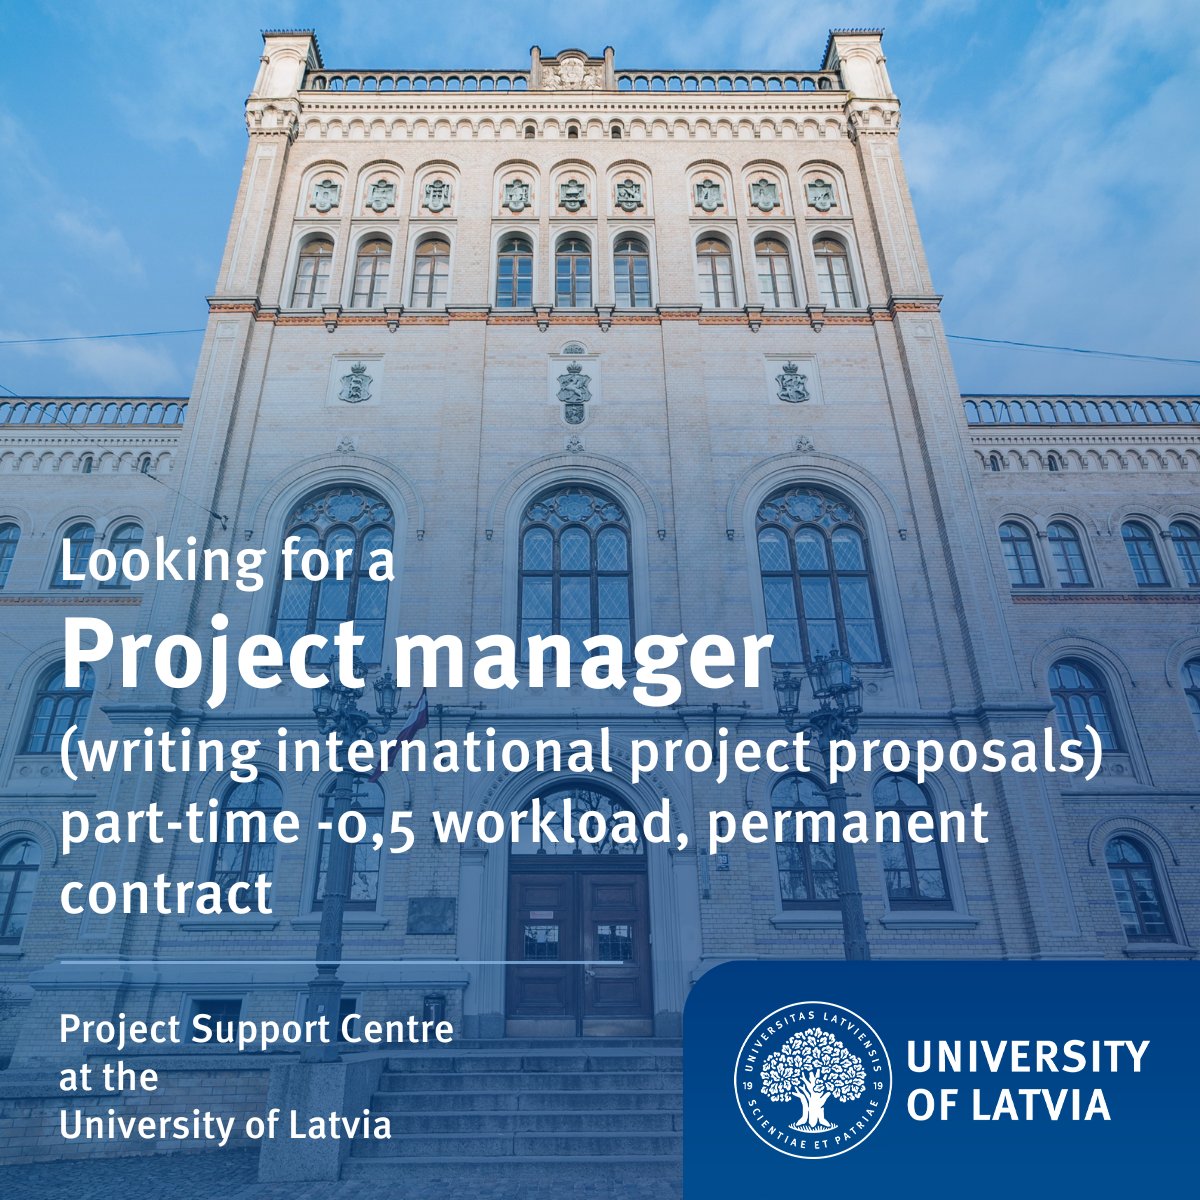 We looking for a project manager for writing international project proposals! Have a look to see if it's a match and if so - we look forward to receiving your application until September 15! 👉lu.lv/en/about-us/va…